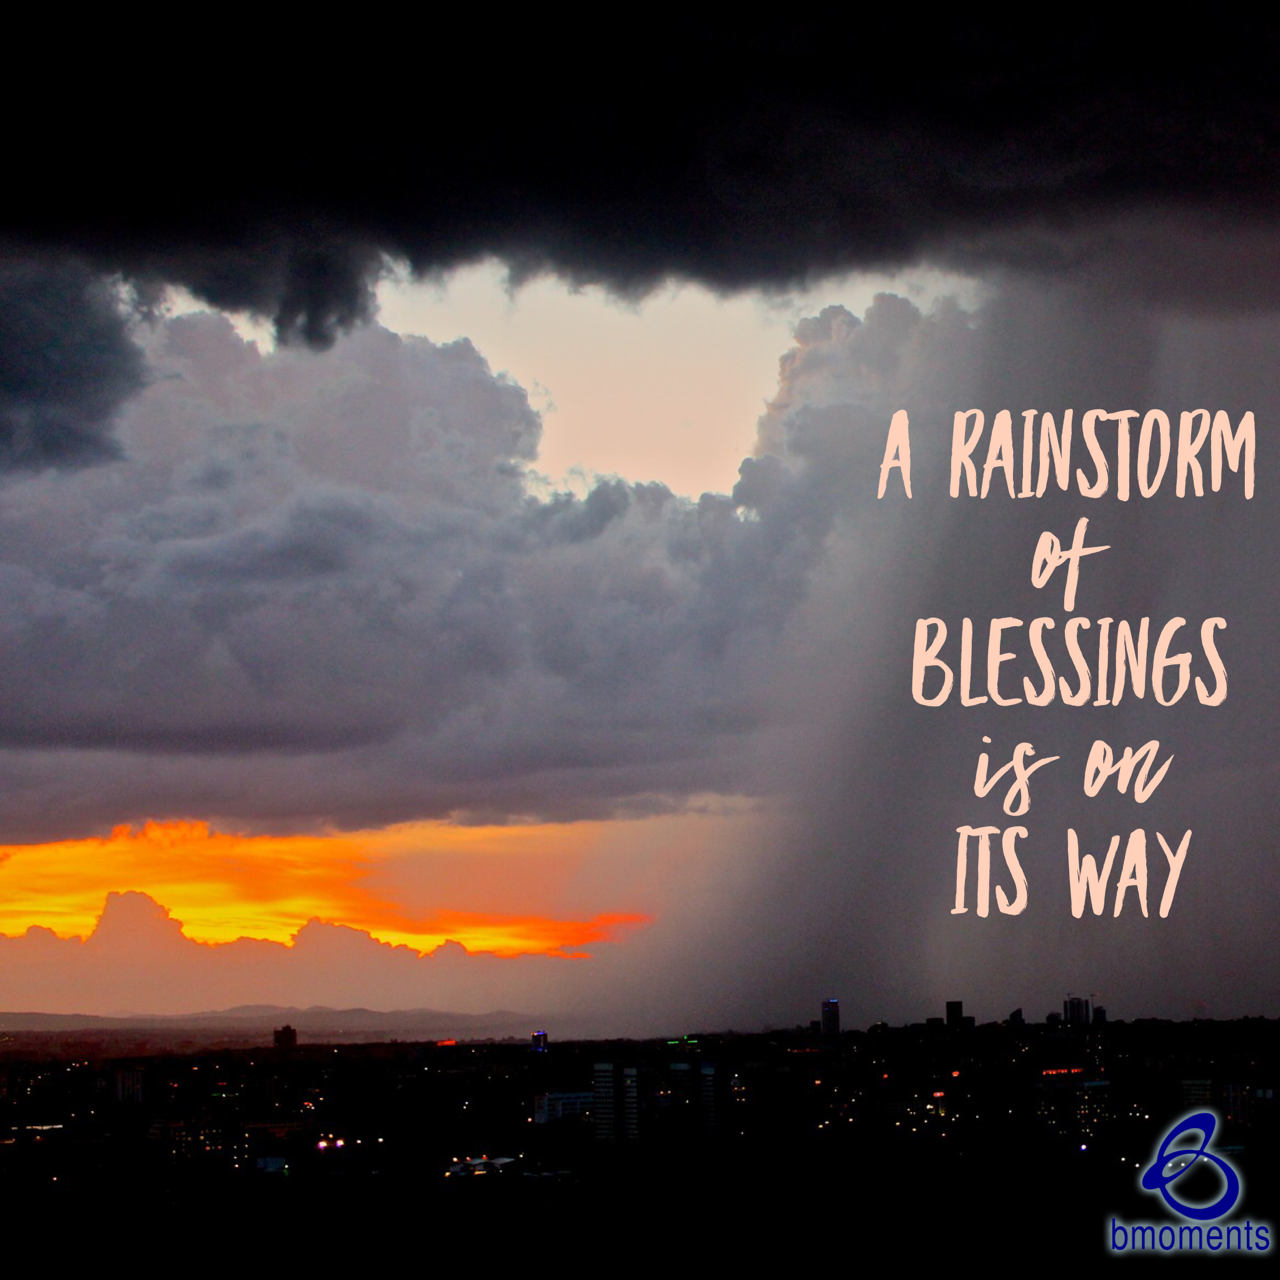 A Rainstorm of Blessings Awaits You